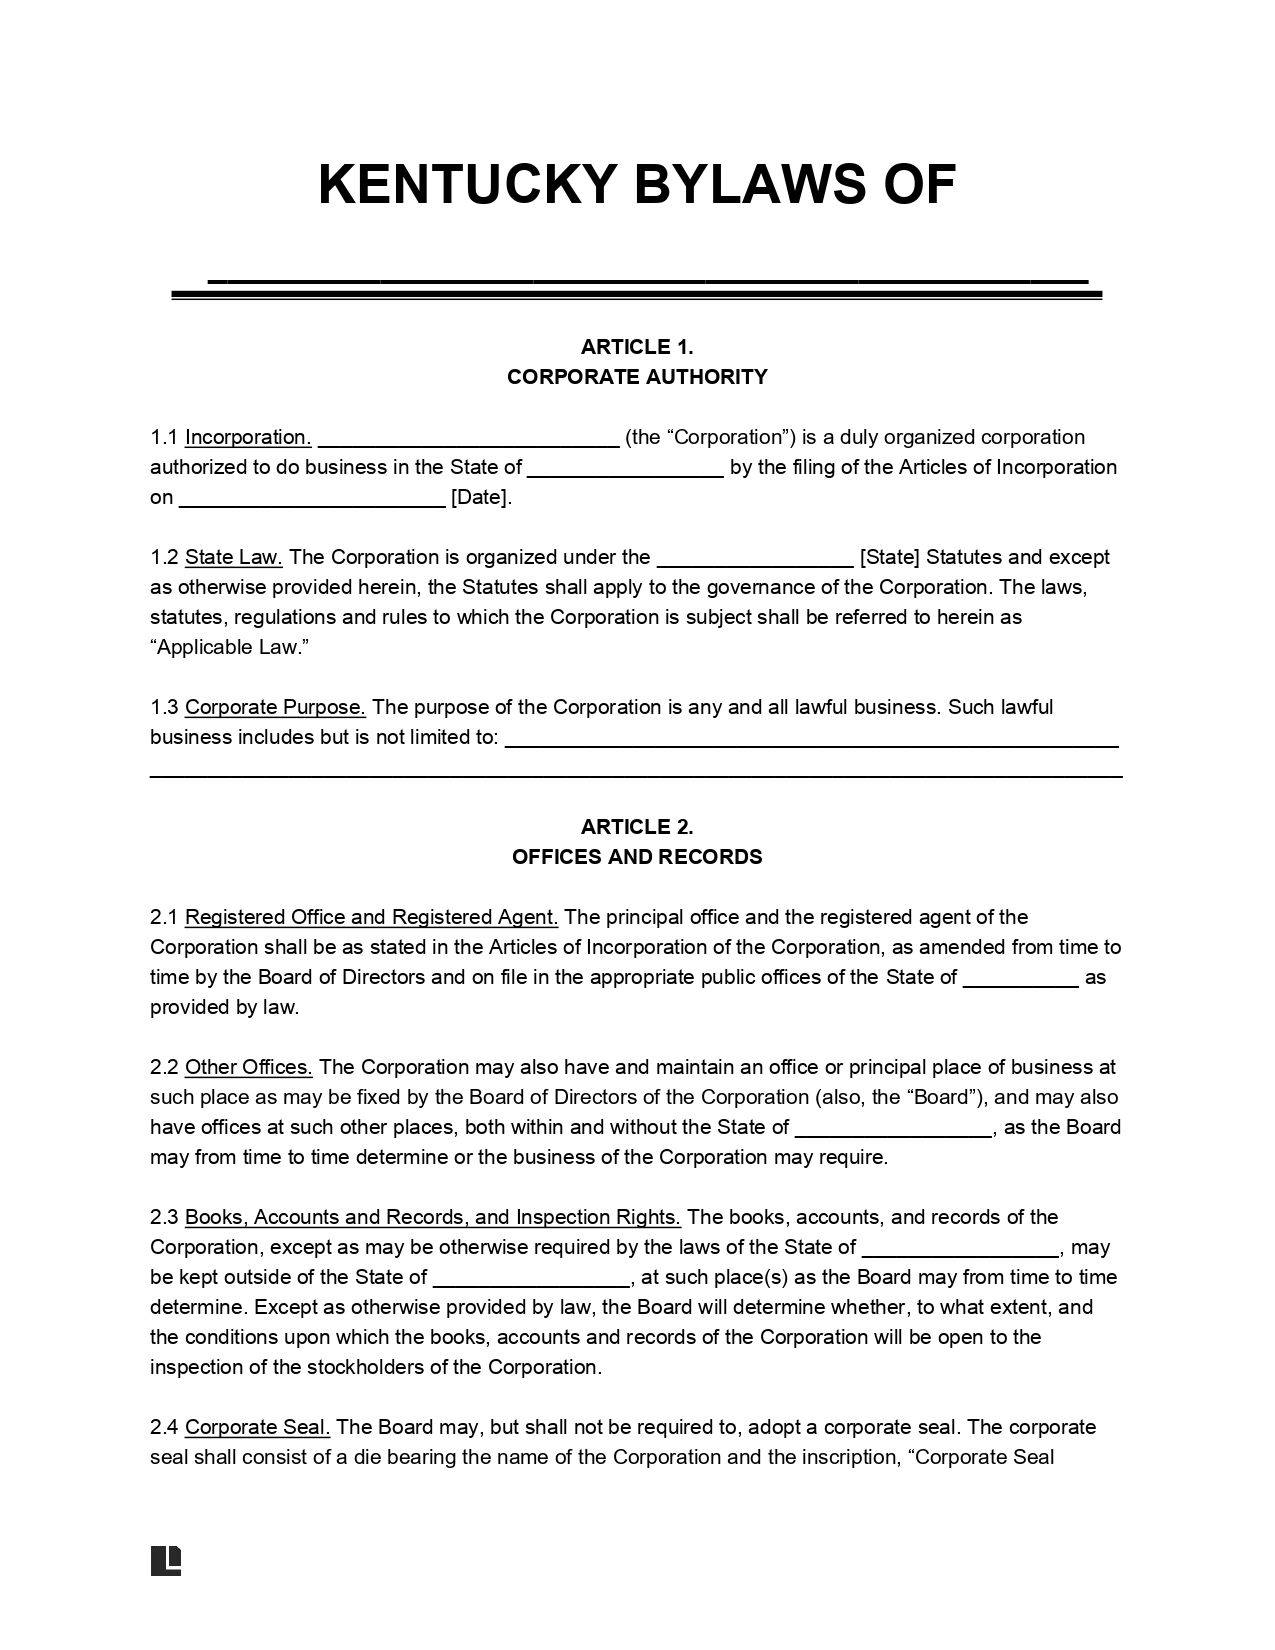 Kentucky Corporate Bylaws Template